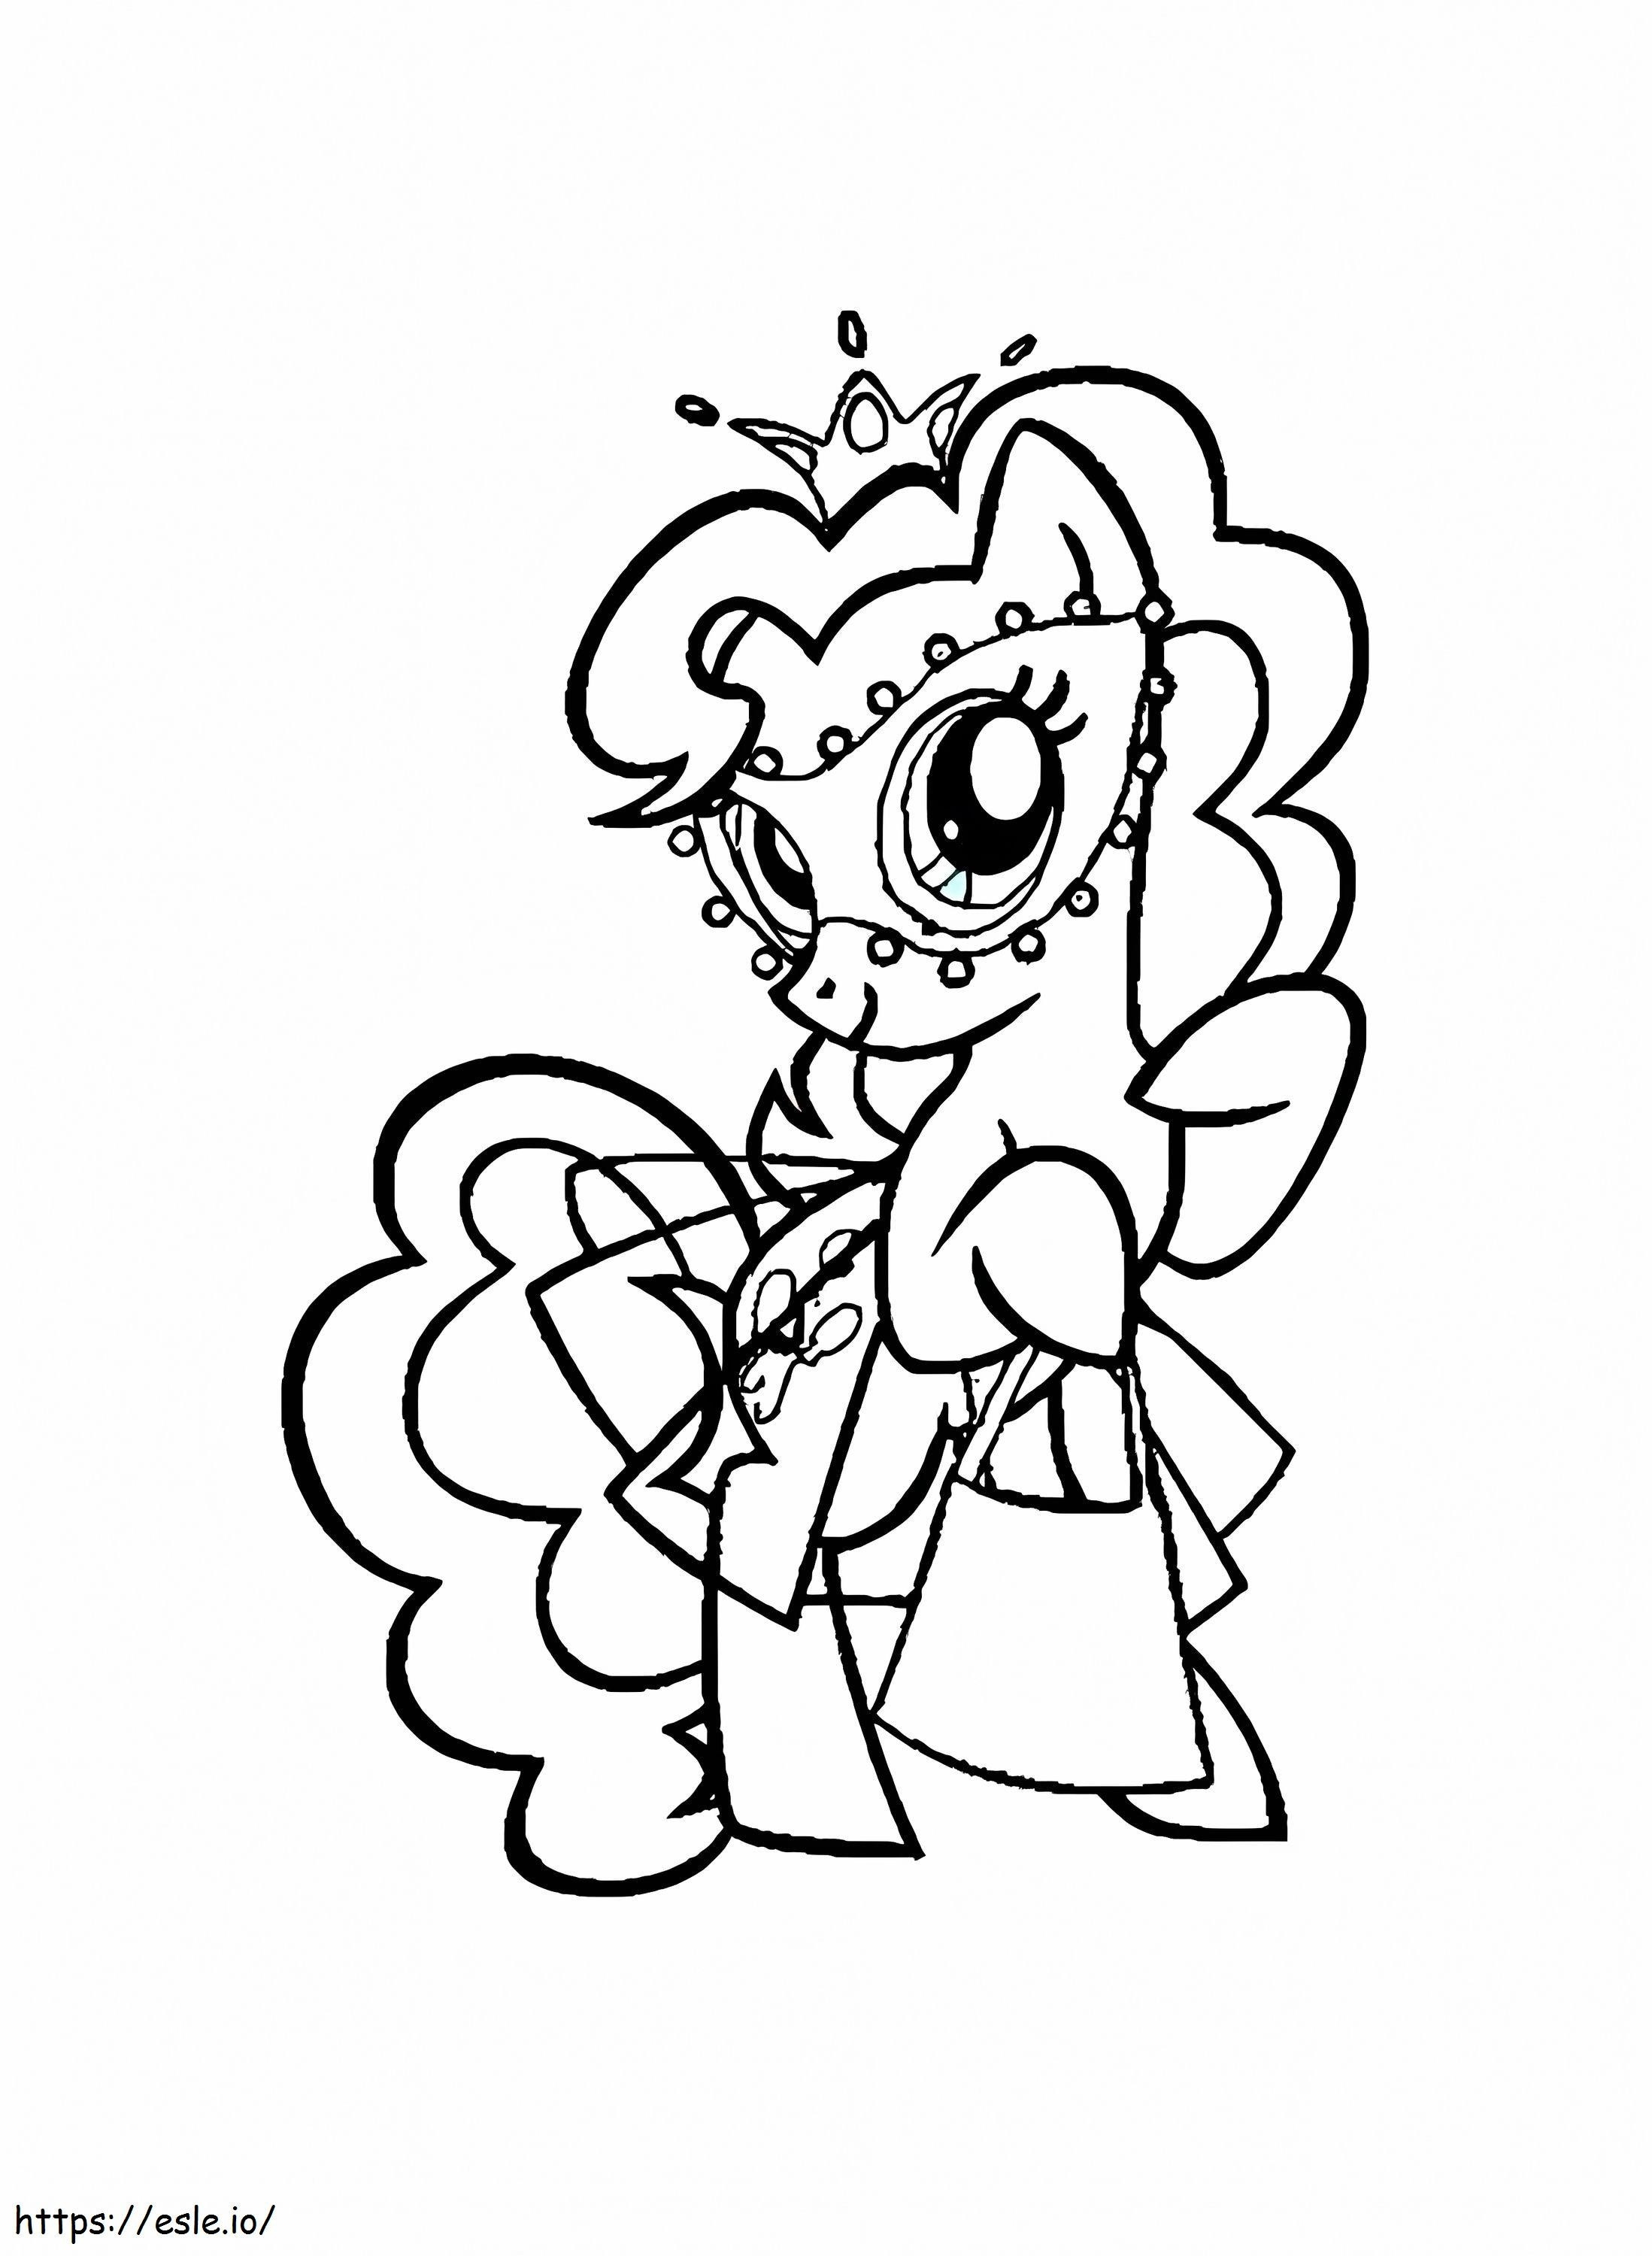 Pinkie Pie Goes Shopping coloring page